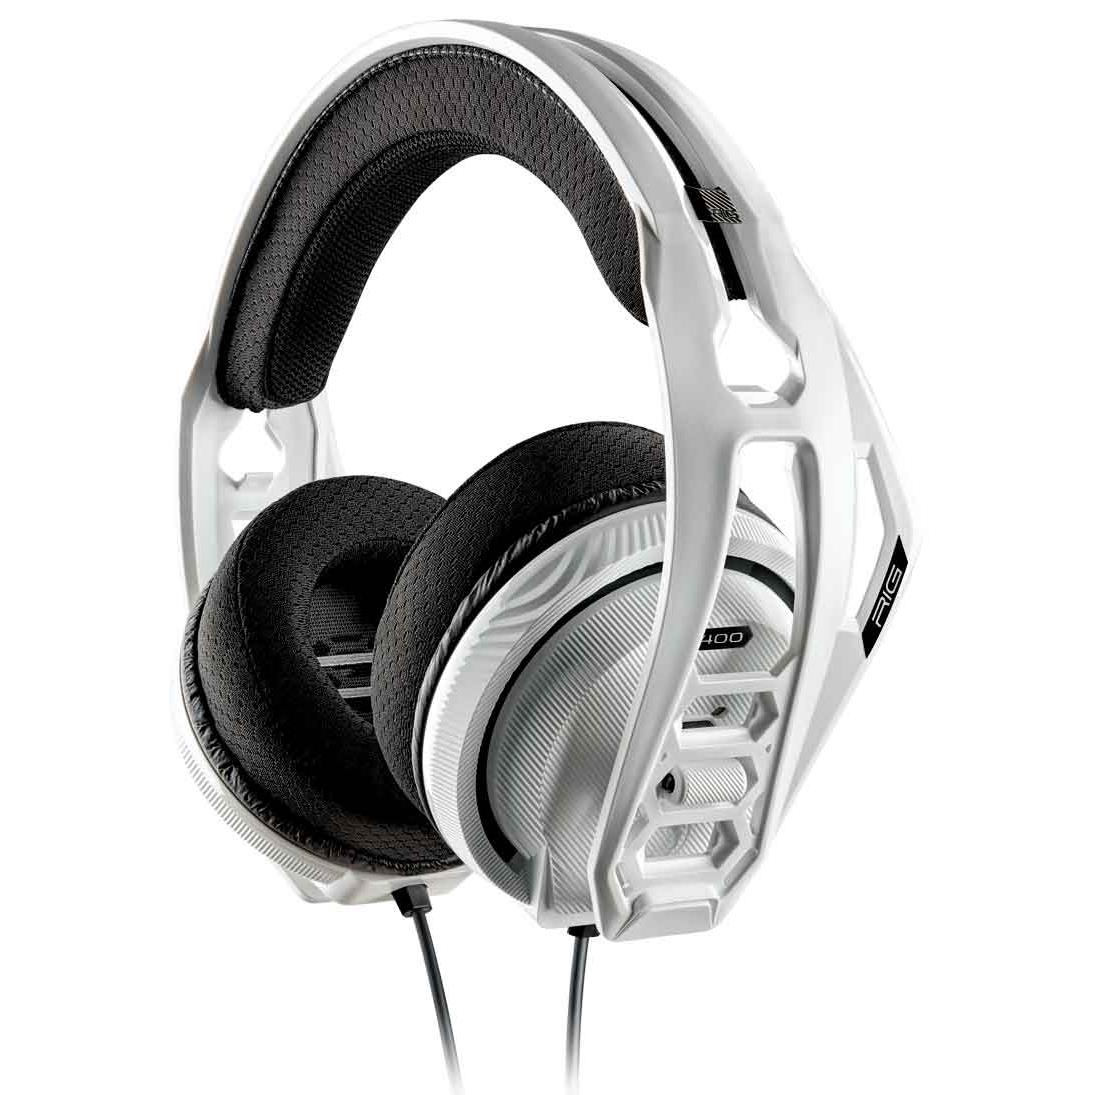 rig 400 hs stereo gaming headset for playstation (white)